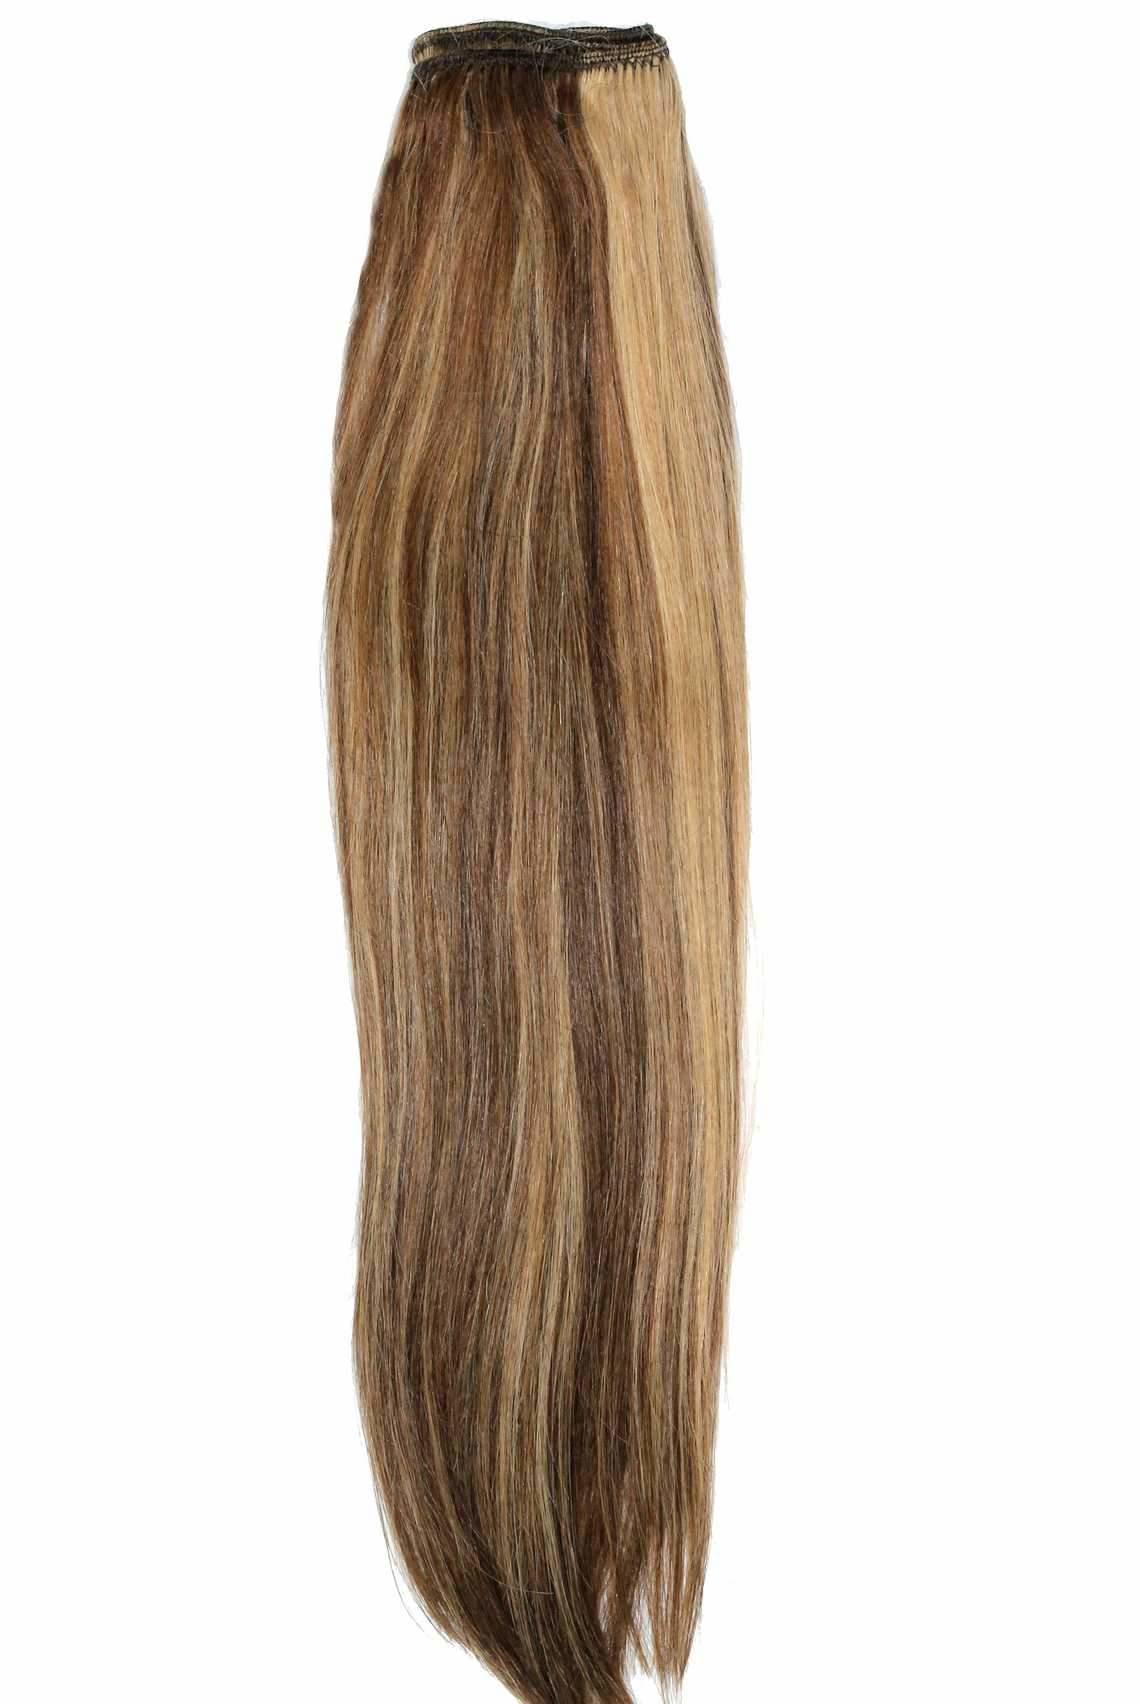 Weft Hair Extensions Medium Brown & Blonde Mix (#4/27) | Forever Young